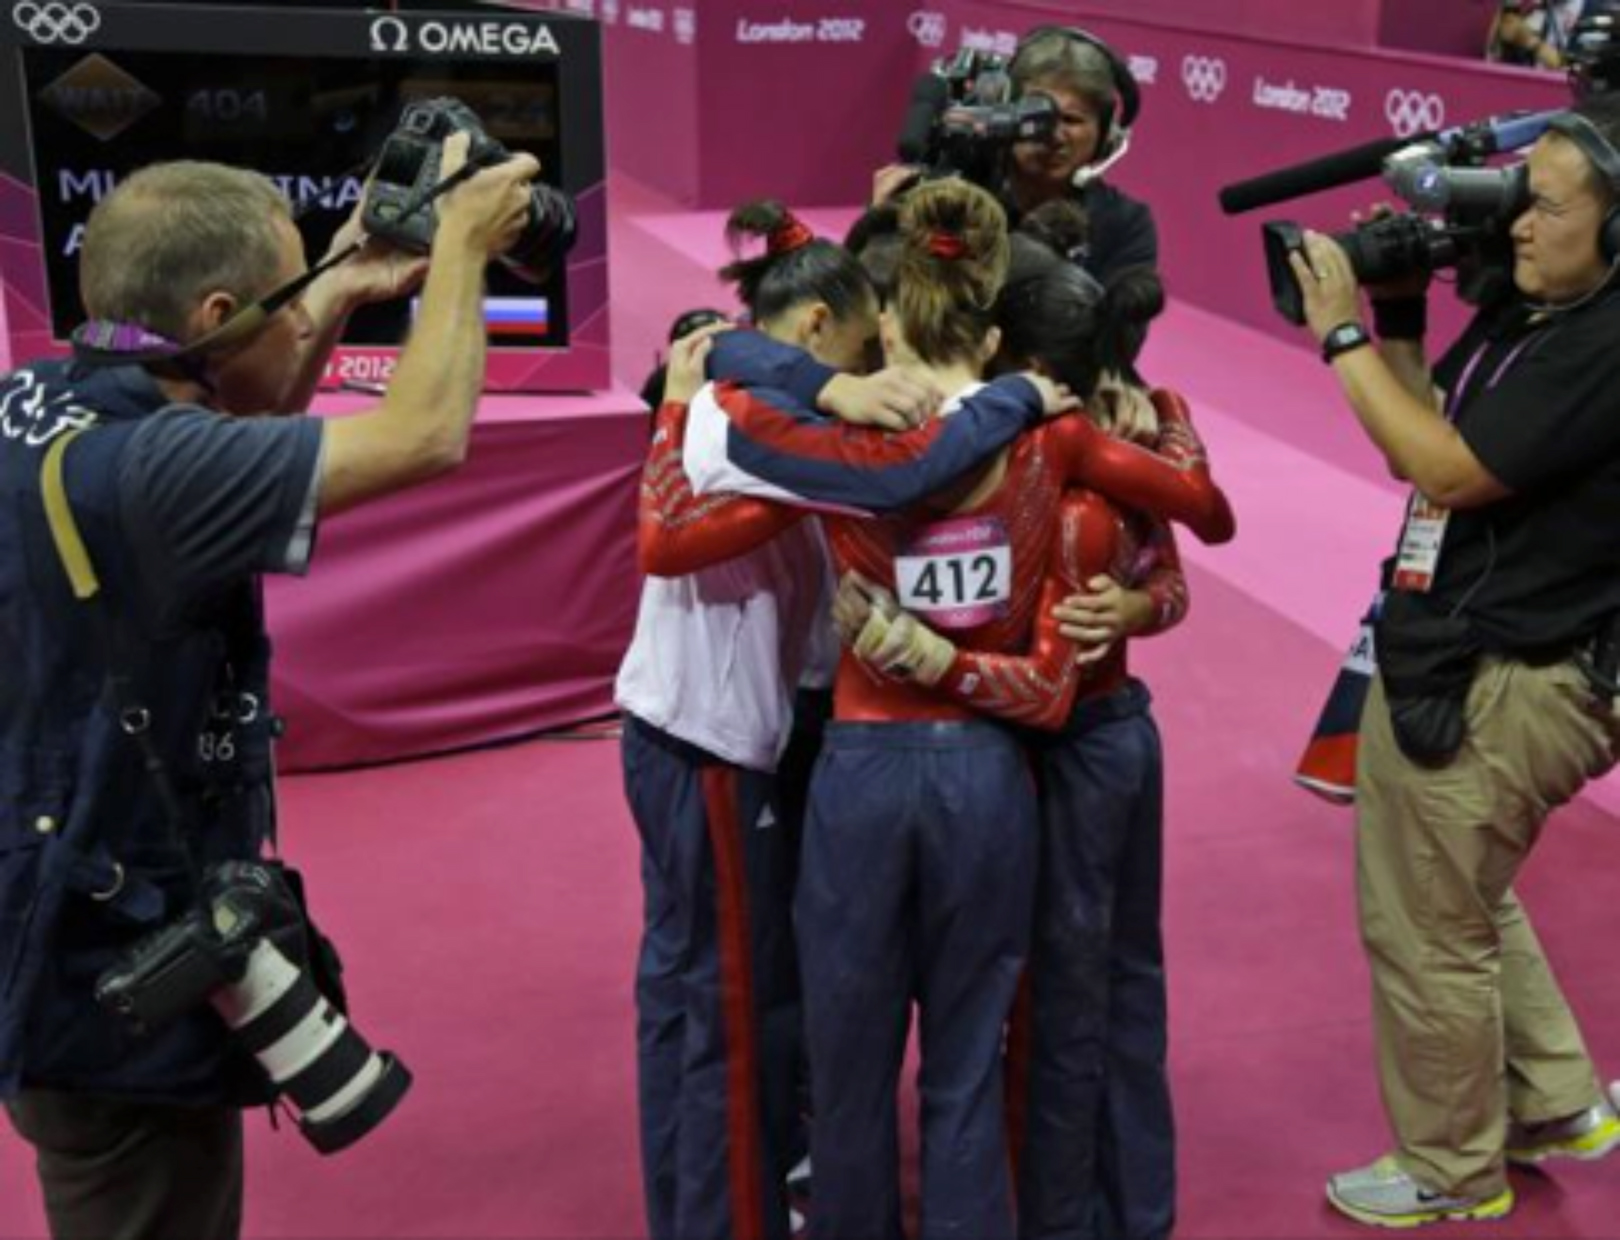 An unconventional shot of the victorious US women's gymnastics team that shows paparazzi swarming the victors